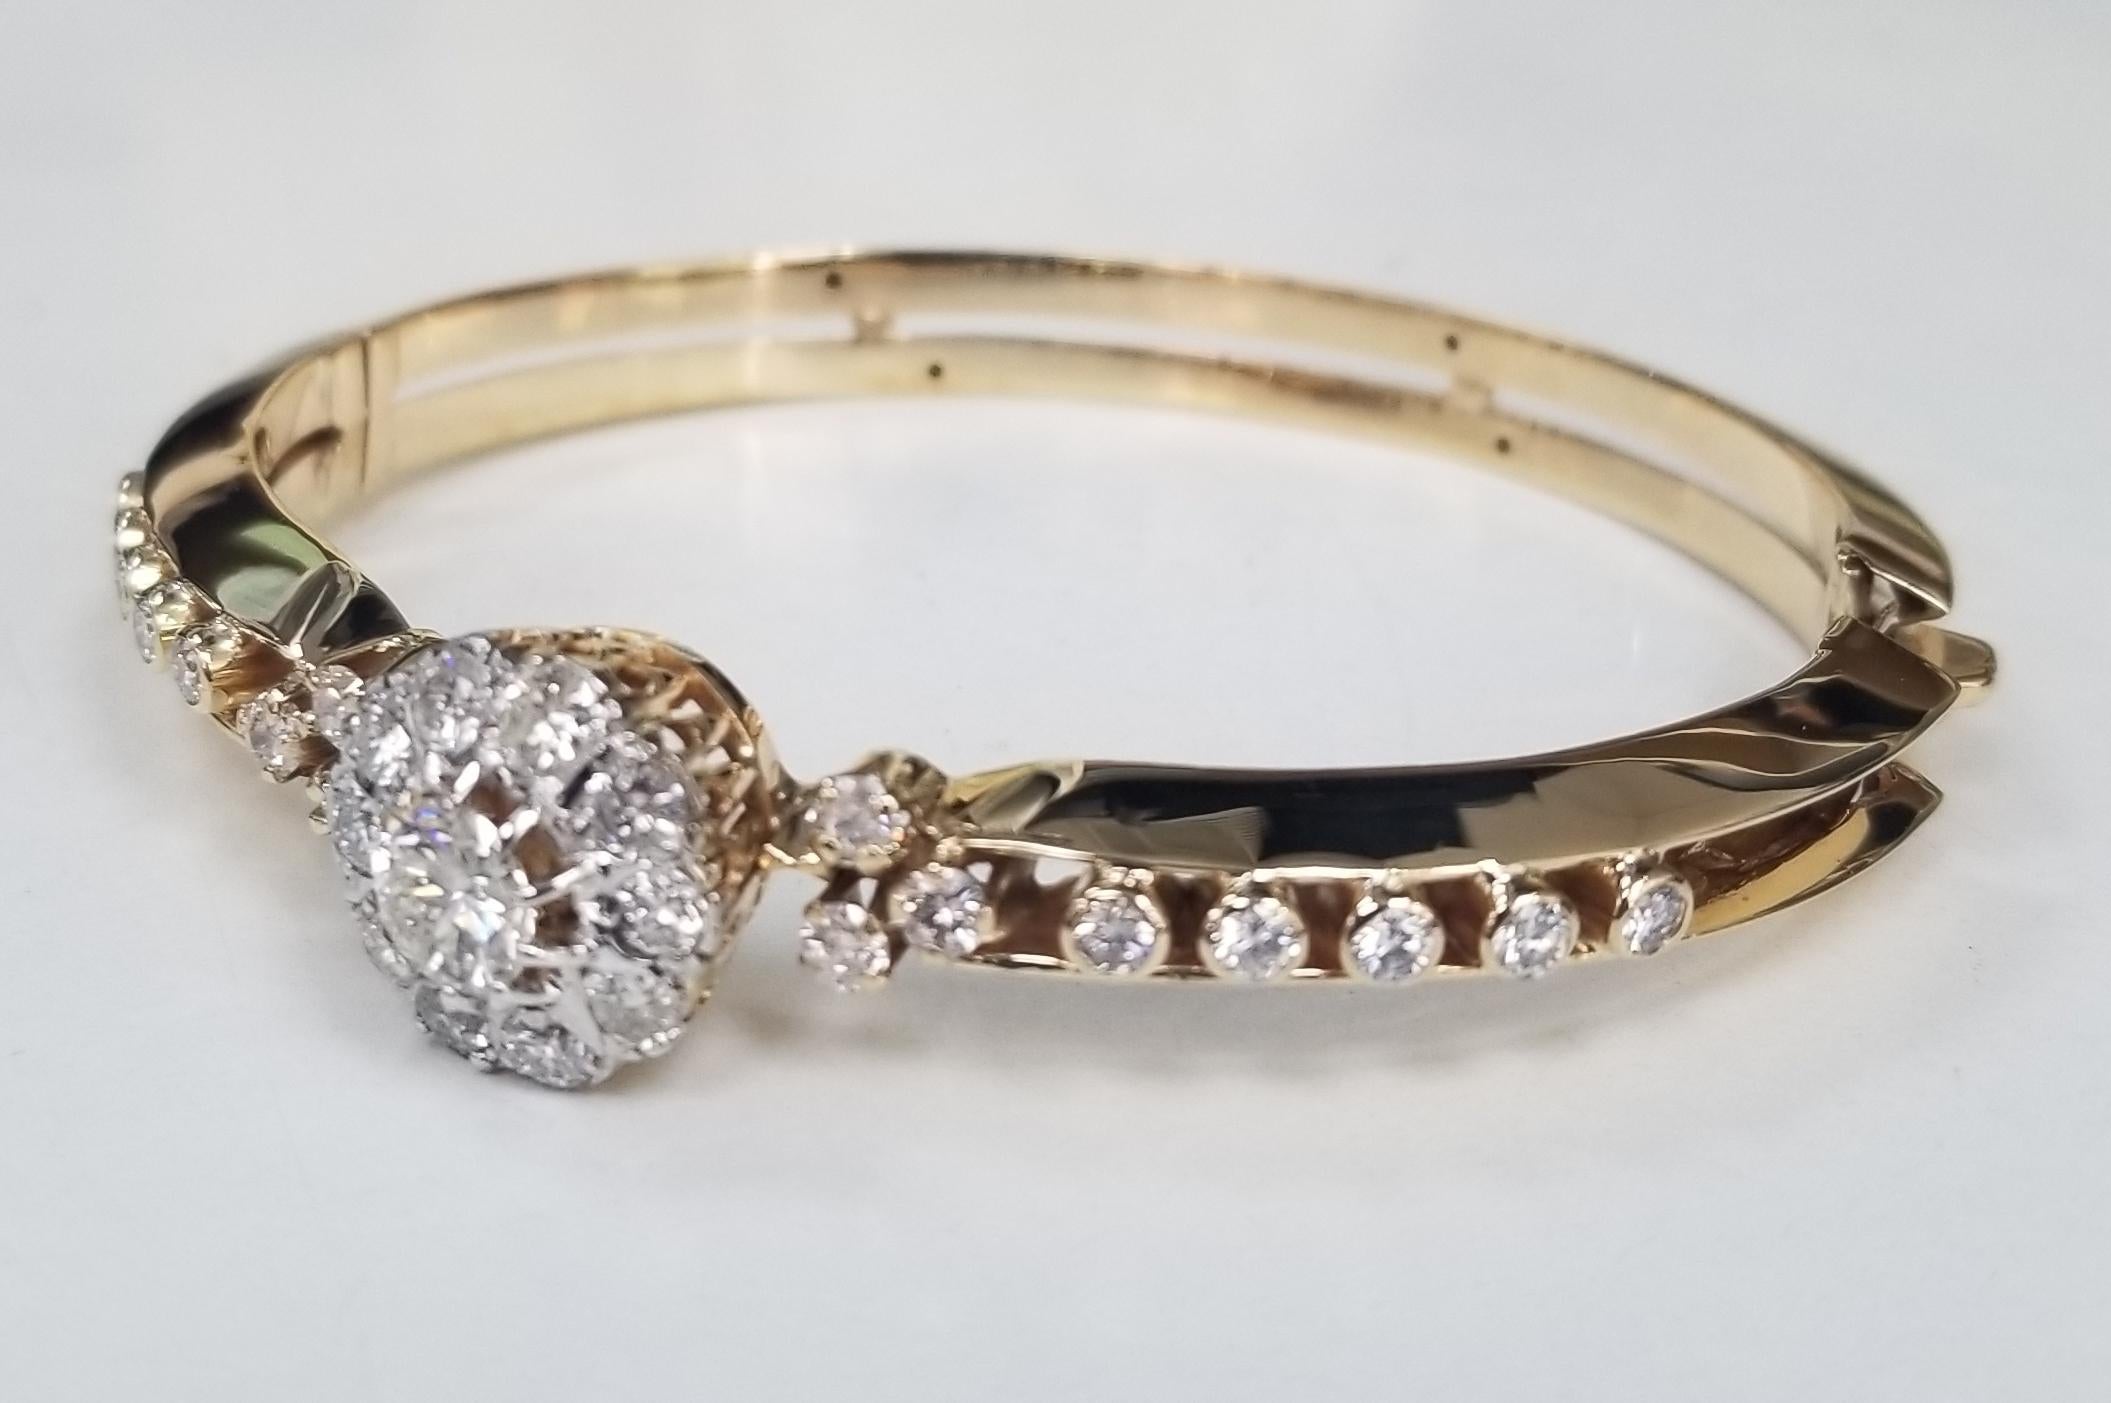 Vintage 14 Karat Yellow Gold Handmade Diamond Bangle Bracelet, containing 
Specifications:
    main stone: ROUND CUT DIAMONDS
    carat total weight: center diamond .77pts. color H and clarity SI2
   additional diamonds; 26 round diamonds weighing